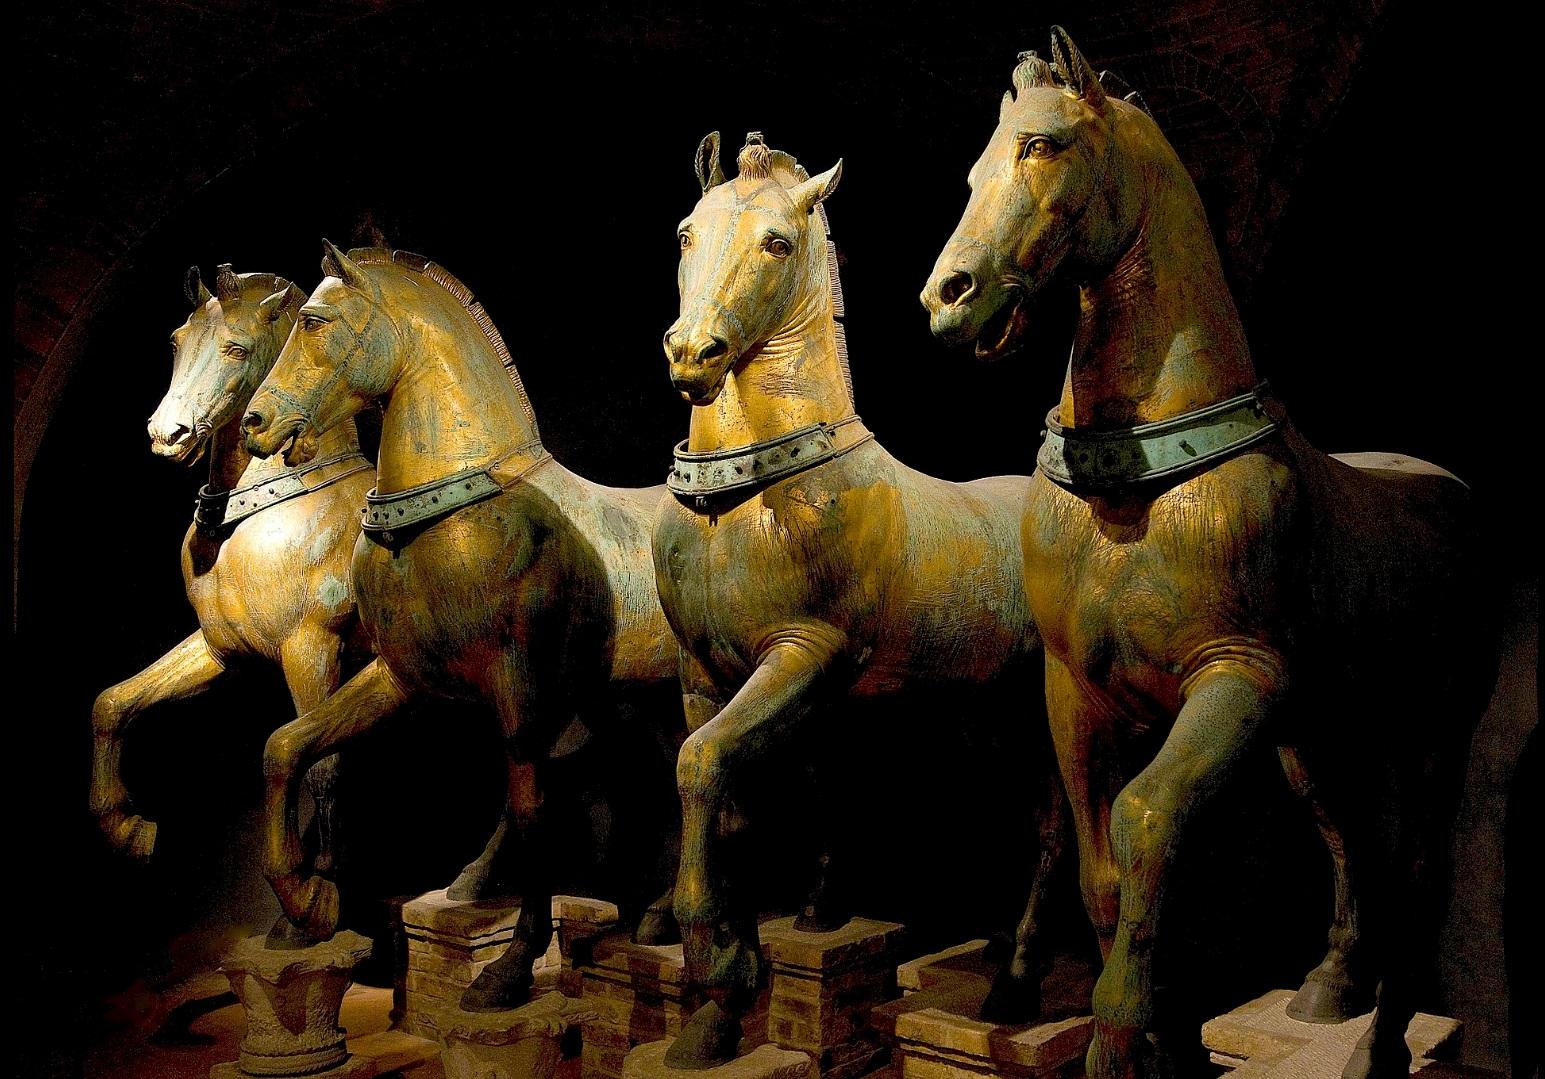 Royal House Antiques

Royal House Antiques is delighted to offer for sale this stunning original Circa 1880 hand made in Italy Grand Tour bronze of the Horses of Saint Marks 

This is an original example not later reproduction, they have the foundry